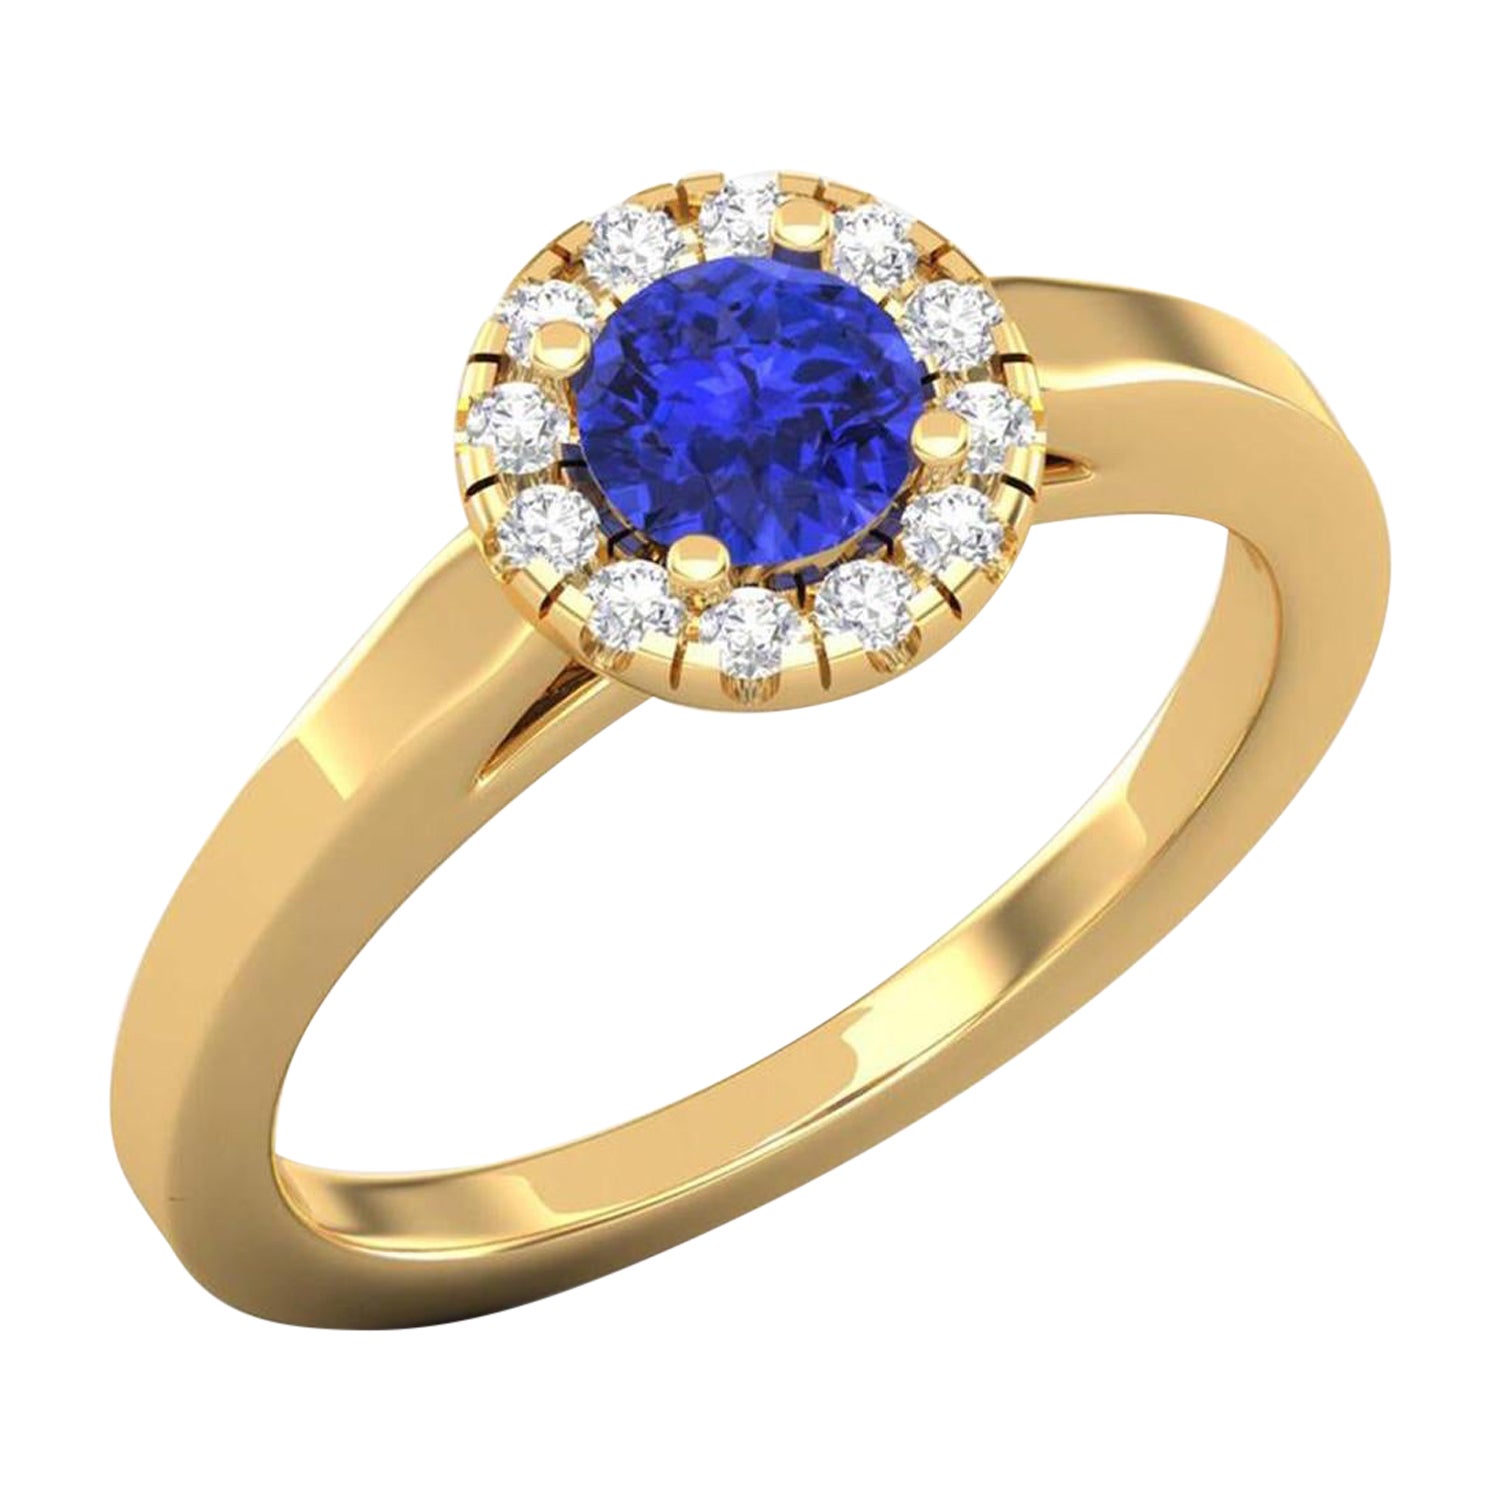 14 Karat Gold Tanzanite Ring / Diamond Solitaire Ring / Ring for Her For Sale